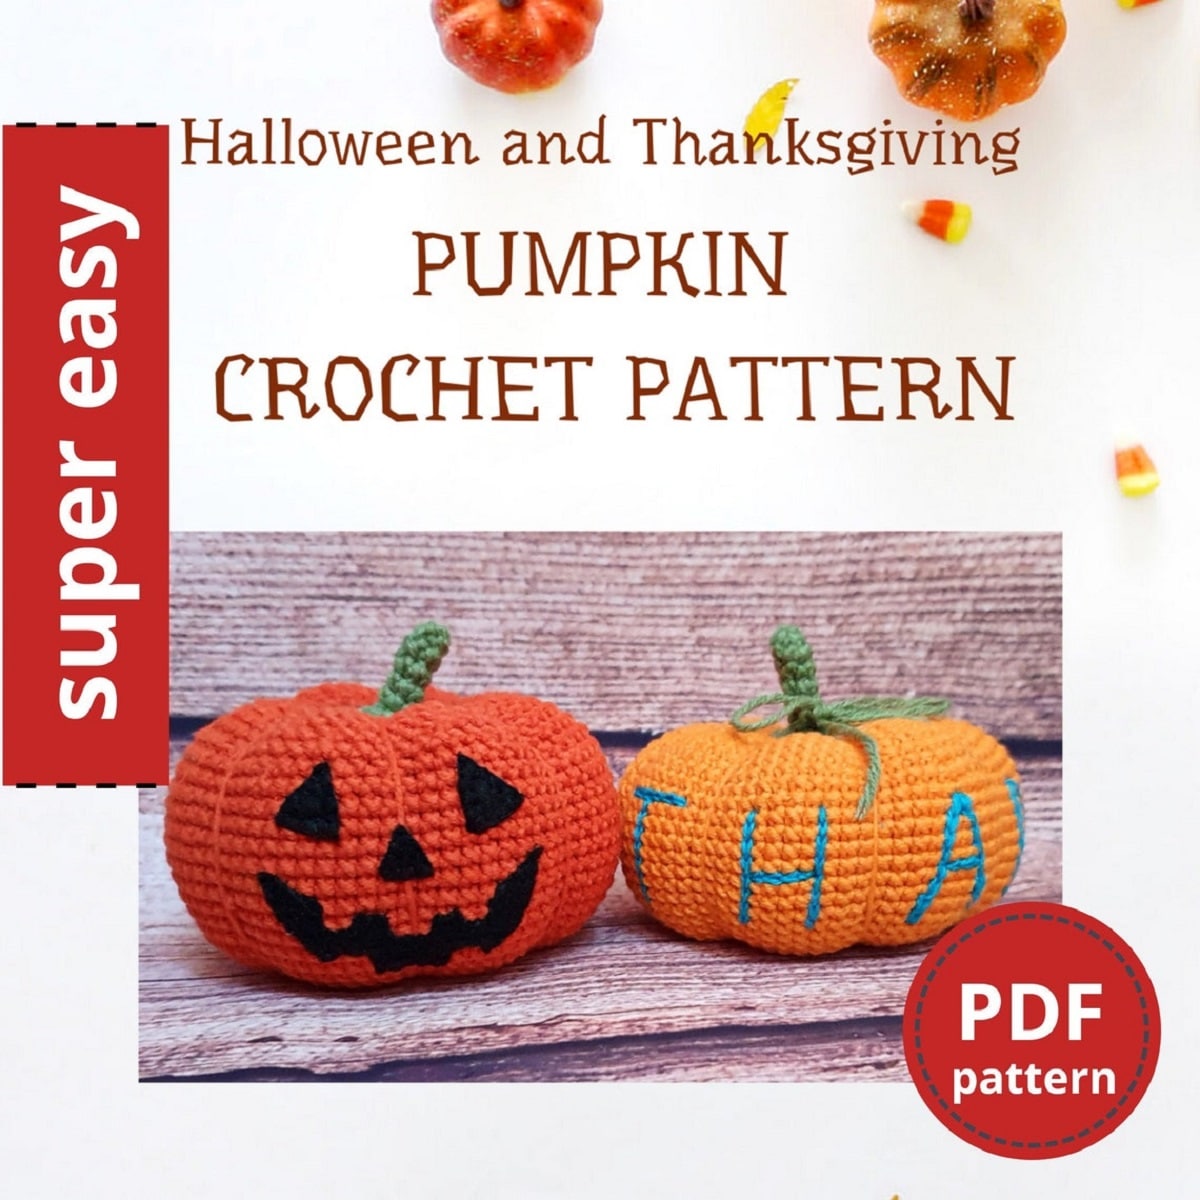 Cover of a crochet pumpkin PDF pattern with a smiling pumpkin on the front next to an orange pumpkin on a wooden background. 